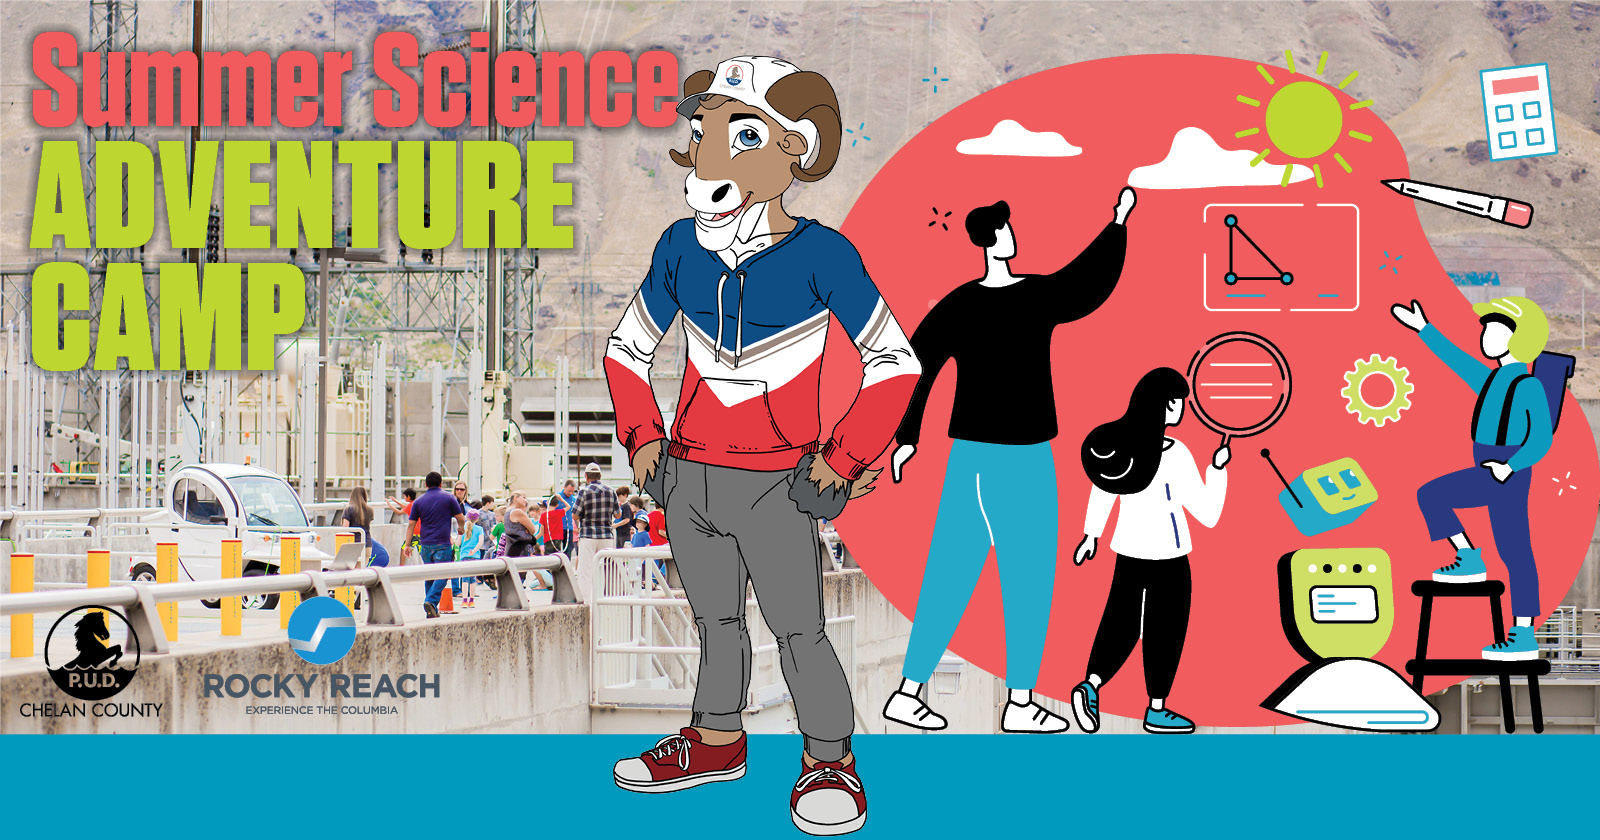 <h1 class="tribe-events-single-event-title">Summer Science Adventure Camp</h1>